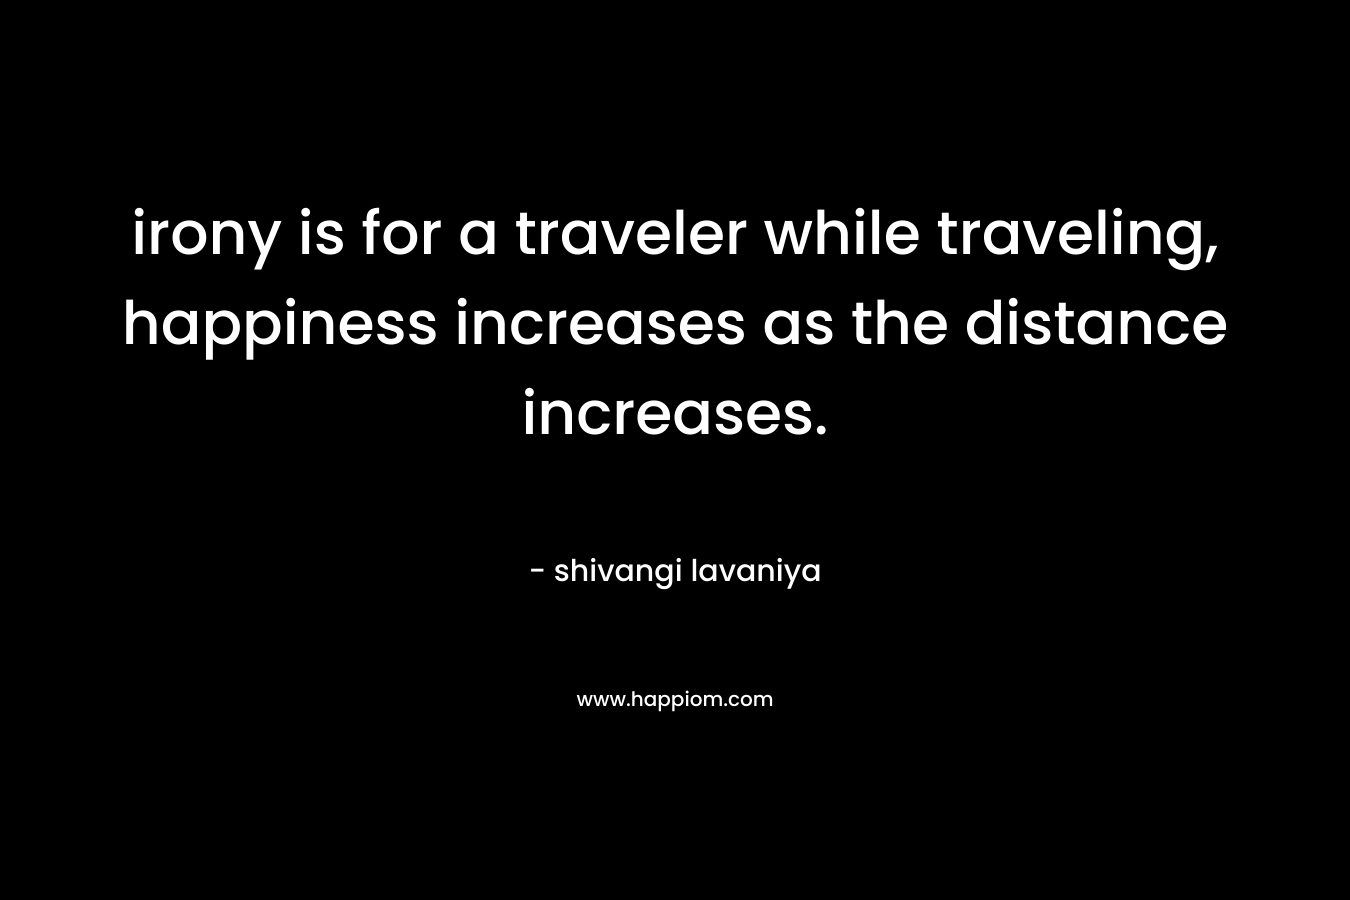 irony is for a traveler while traveling, happiness increases as the distance increases.